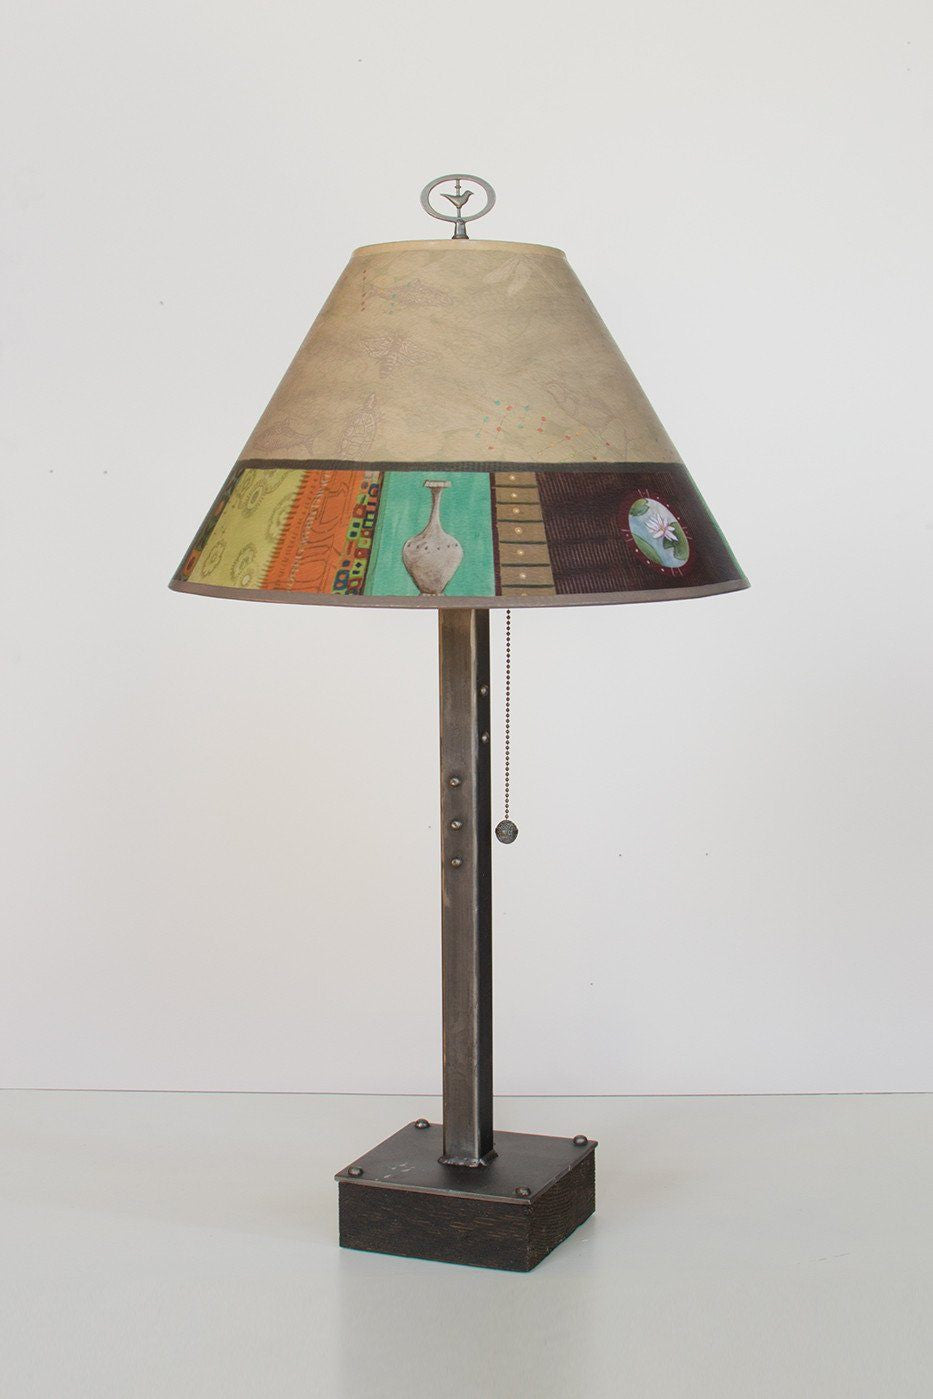 Steel Table Lamp on Wood with Medium Conical Shade in Linen Match